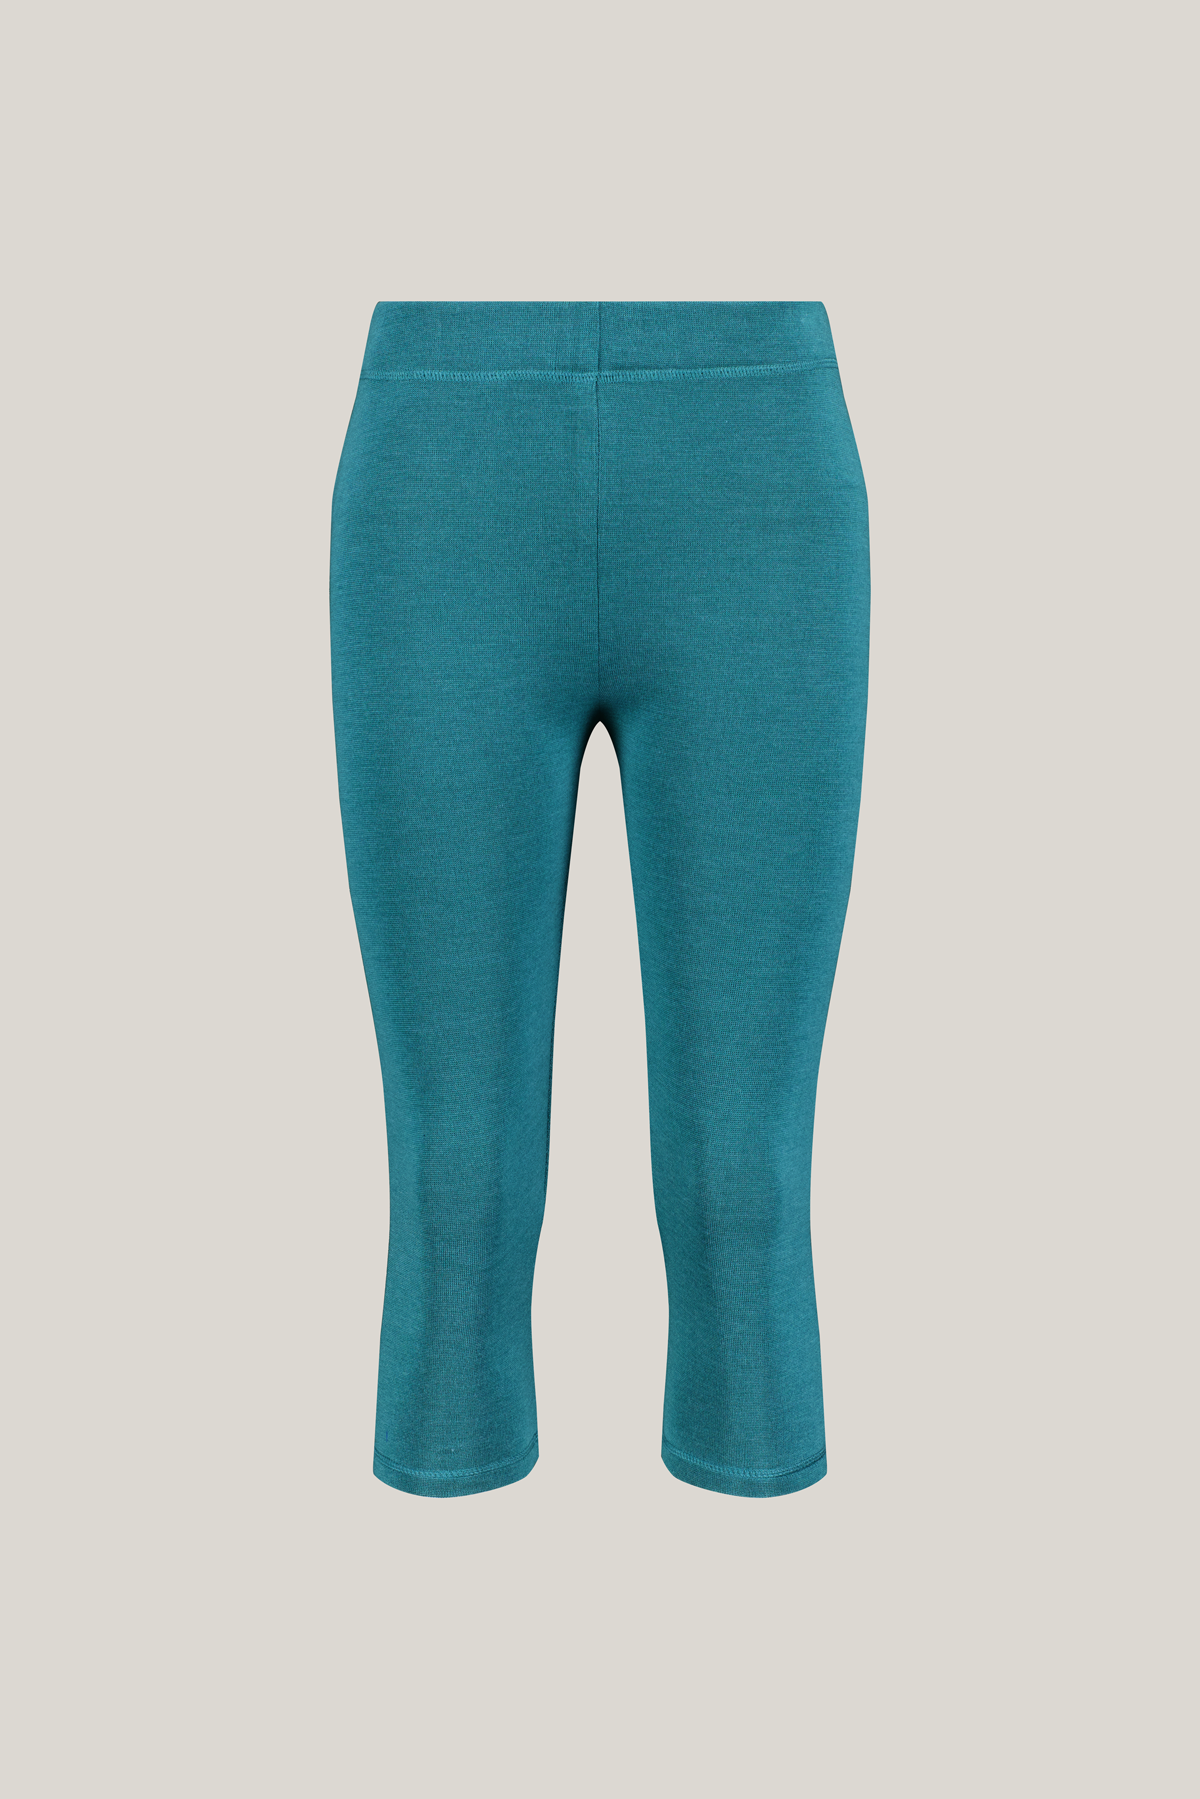 Turquoise blue leggings Freya 3/4 limited edition made of Merino &amp; Tencel from Tidløs